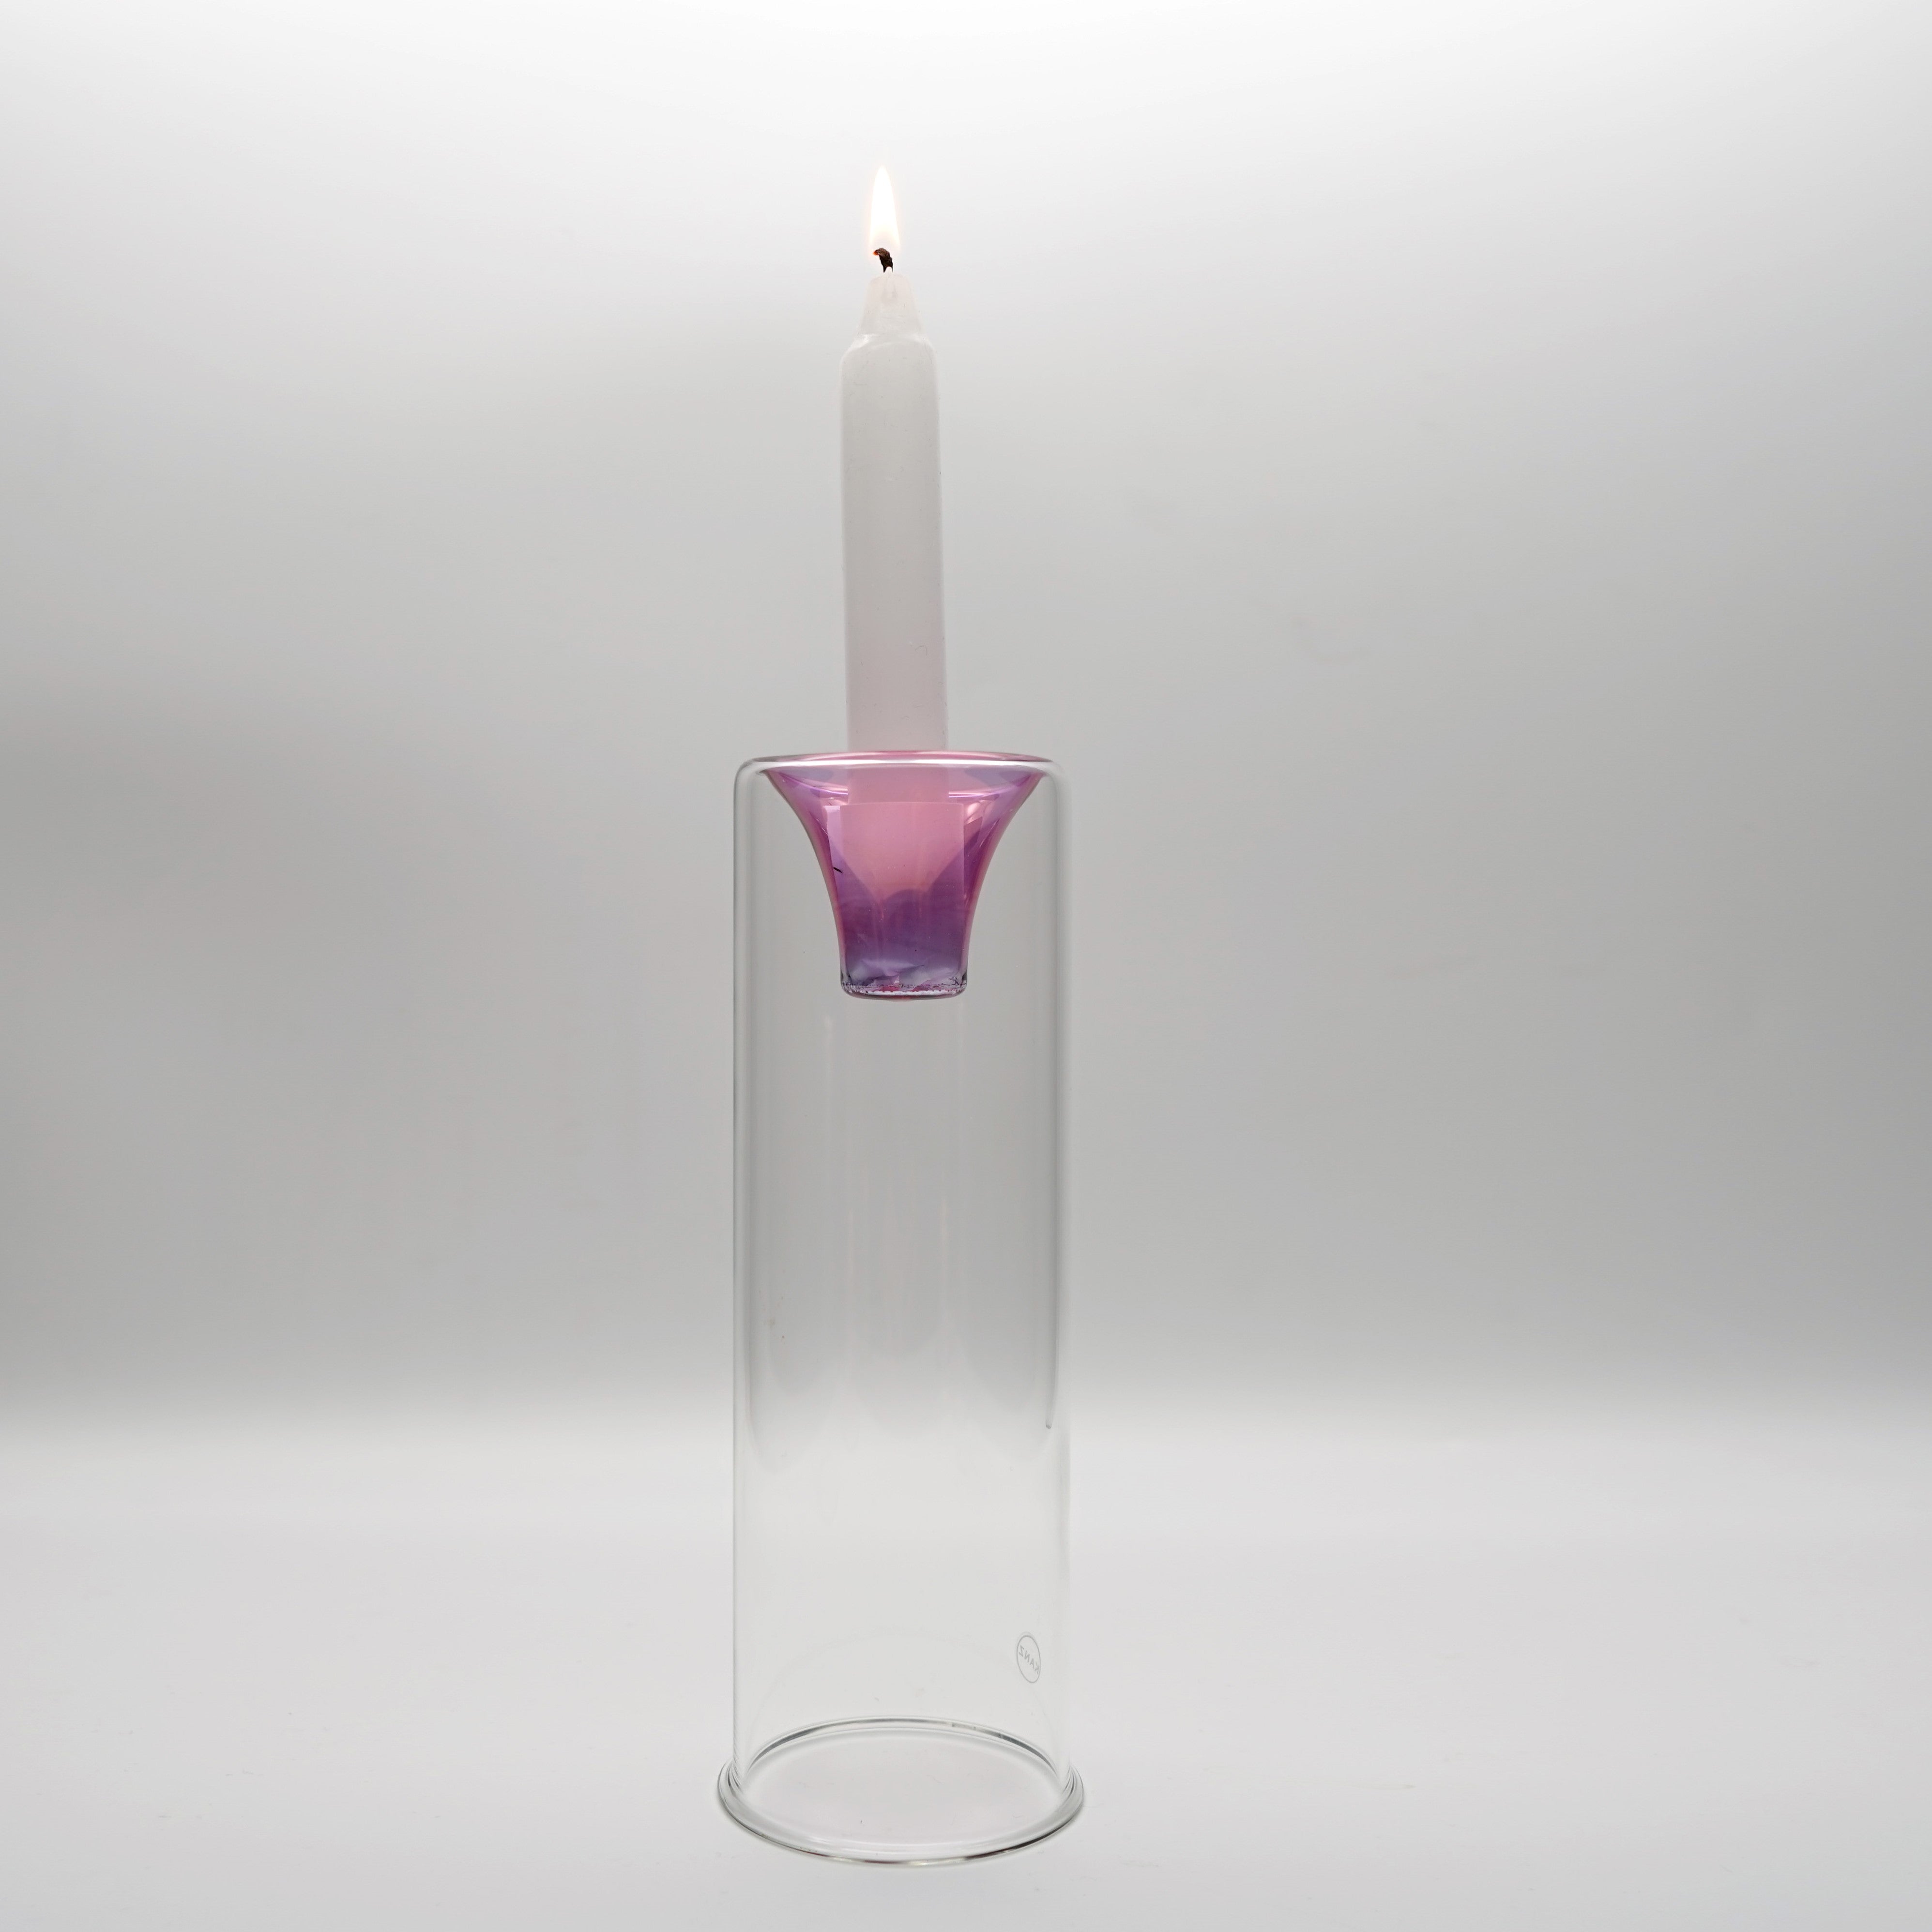 Tharros - large candle holder (comes with three colors) - LAZADO